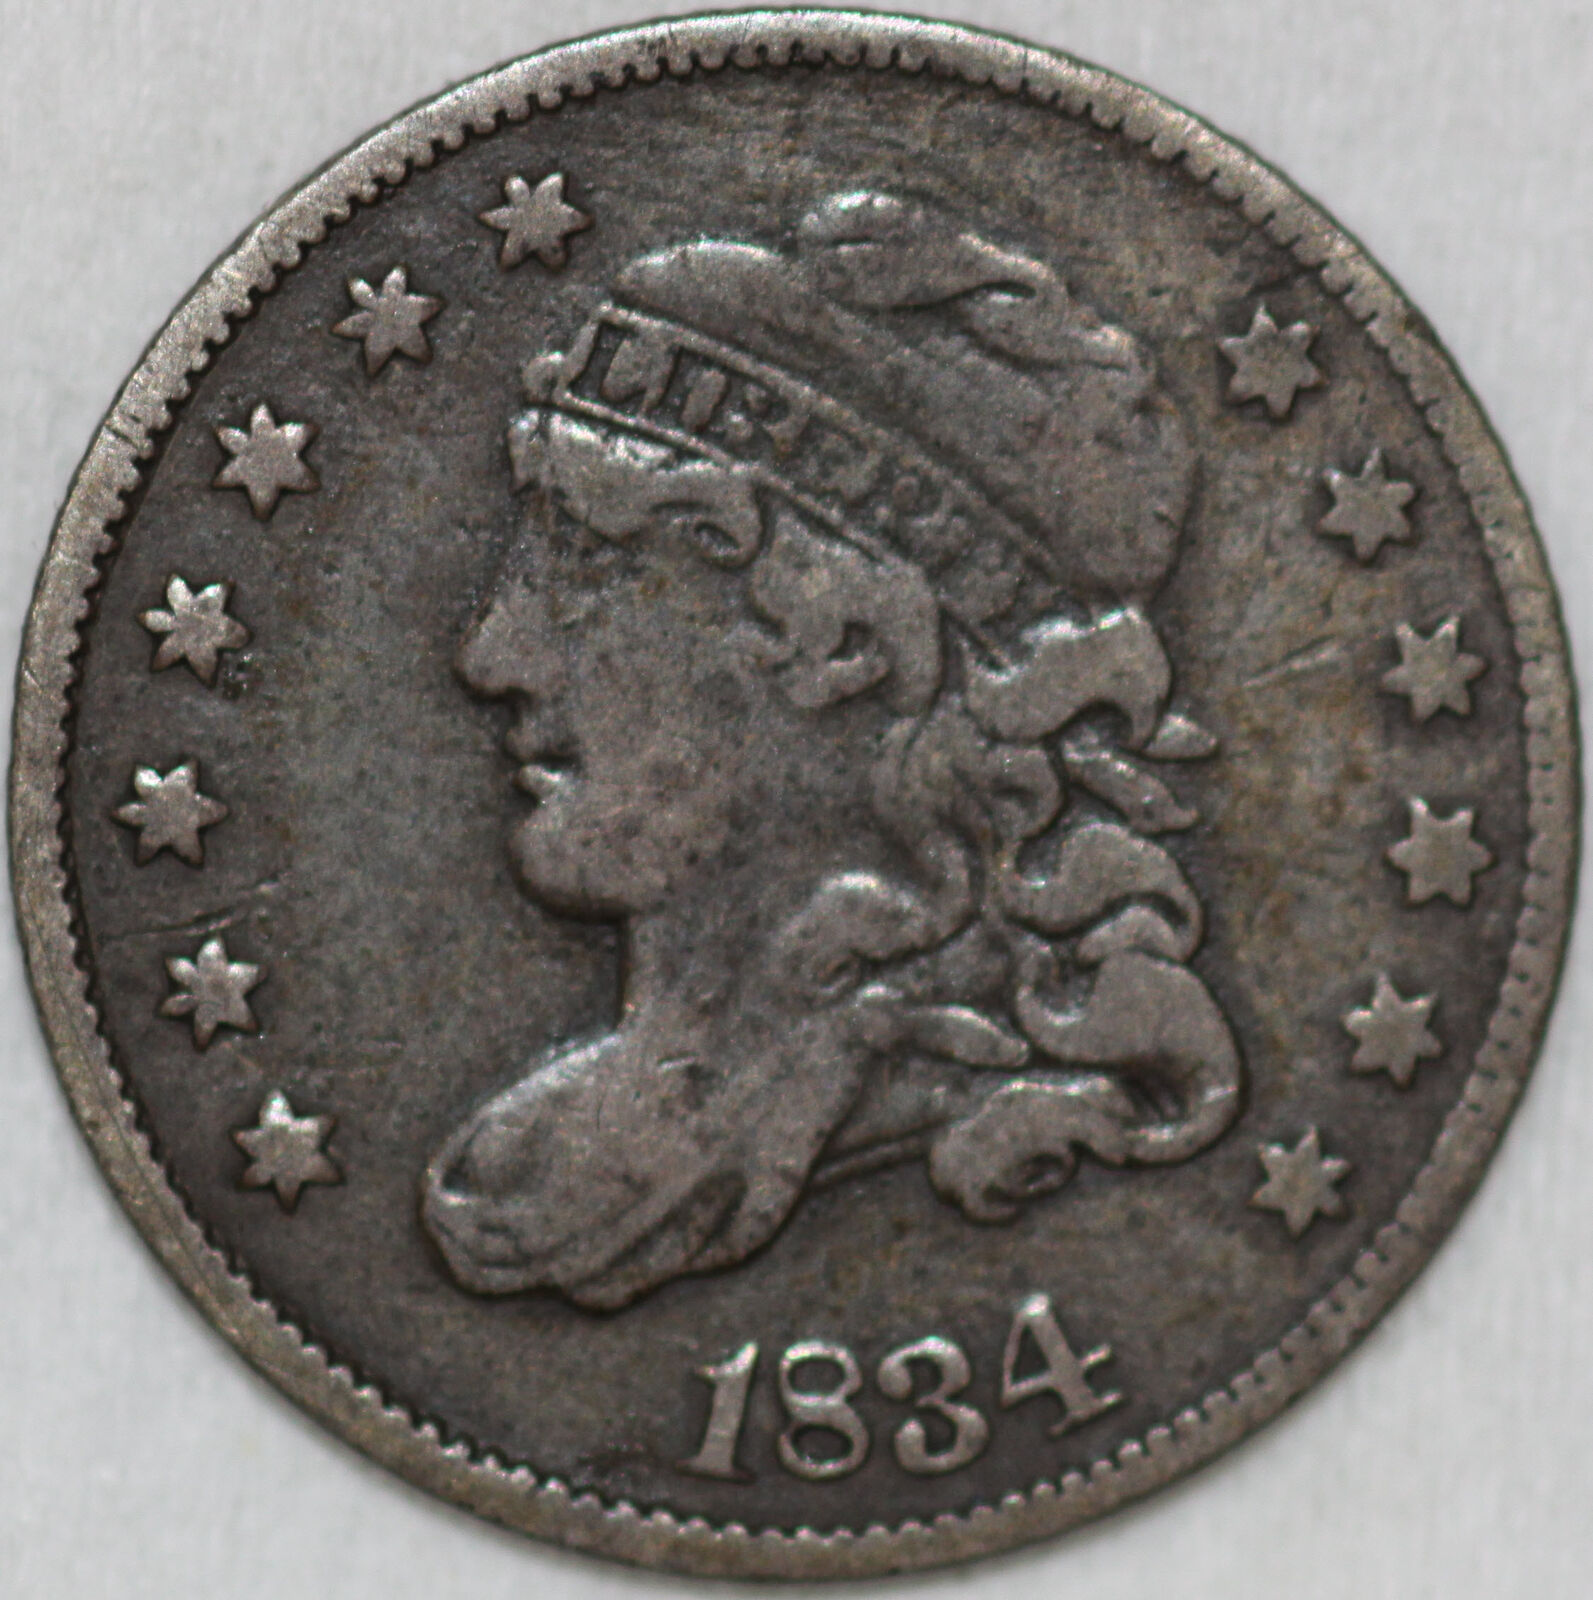 1834-P Capped Bust Half Dime 90% Silver from the 1800's As Shown [SN01]